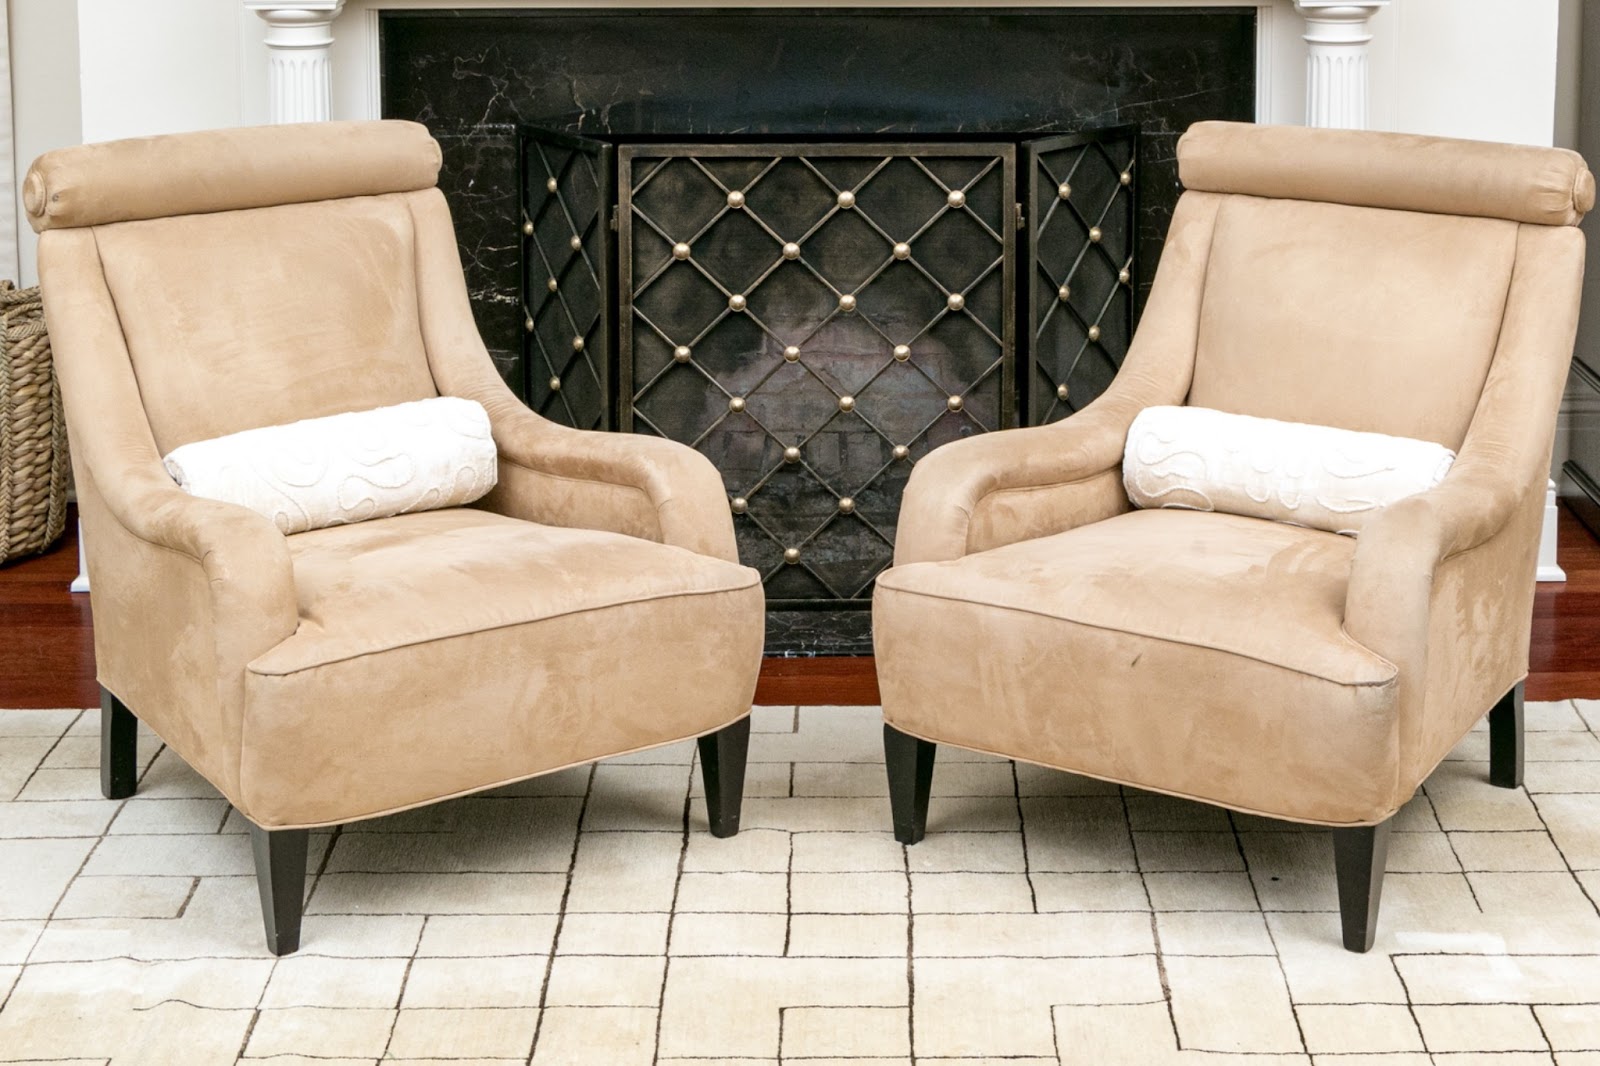 a Pair of creamy beige suede Upholstered Armchairs with white velvet bolster pillows in front of a fireplace.